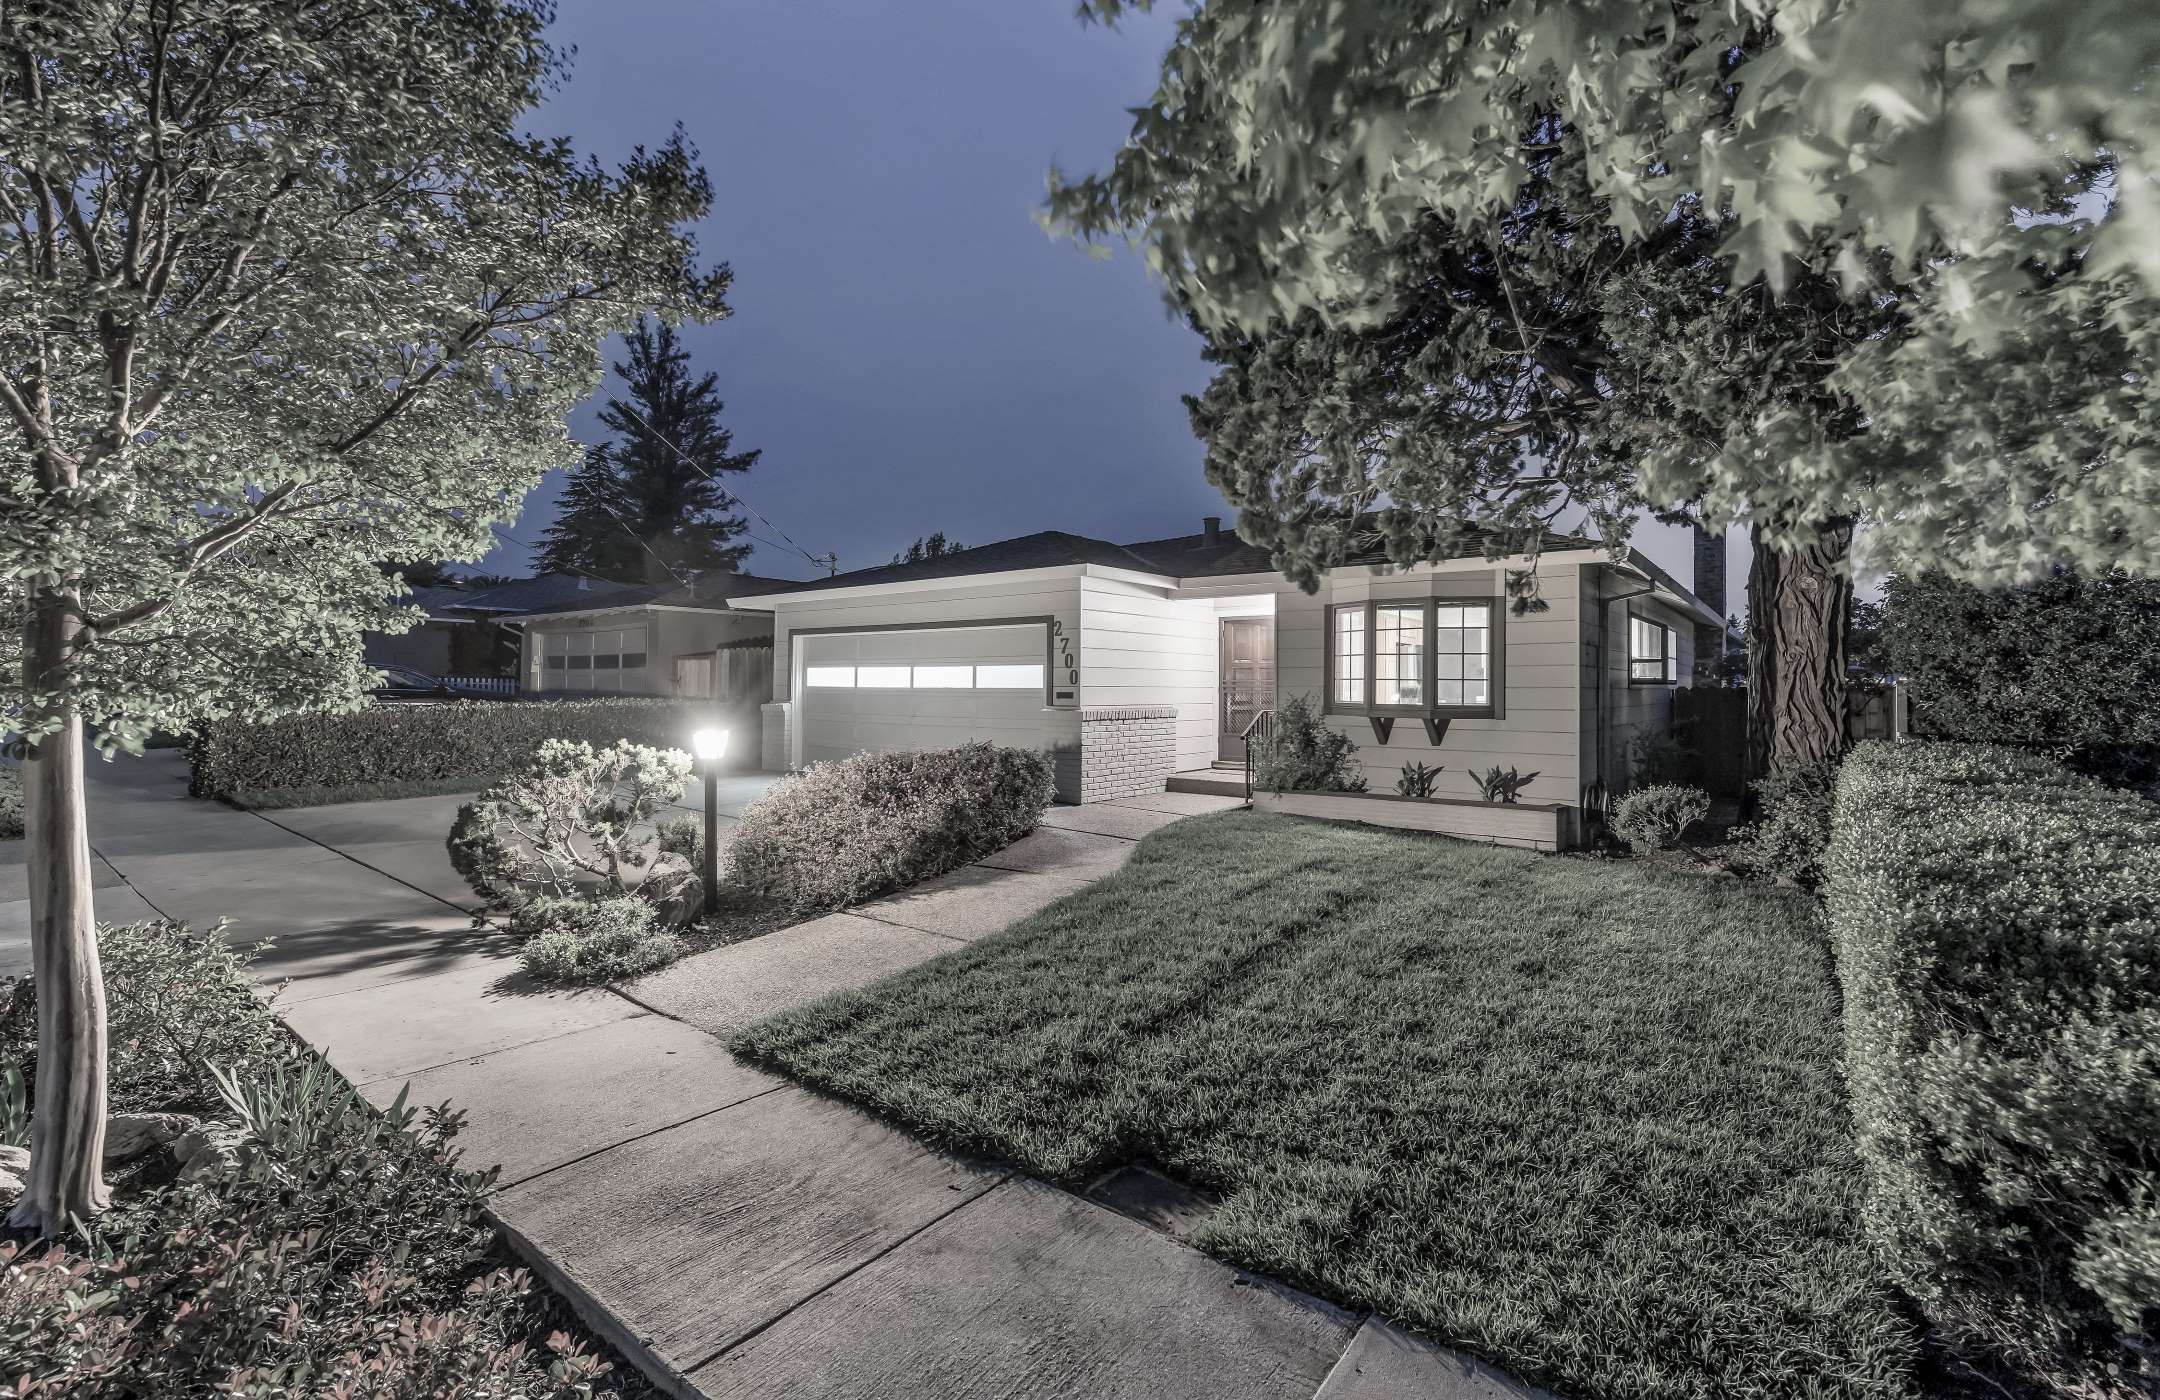 [Our Properties: Eaton Ave in San Carlos]